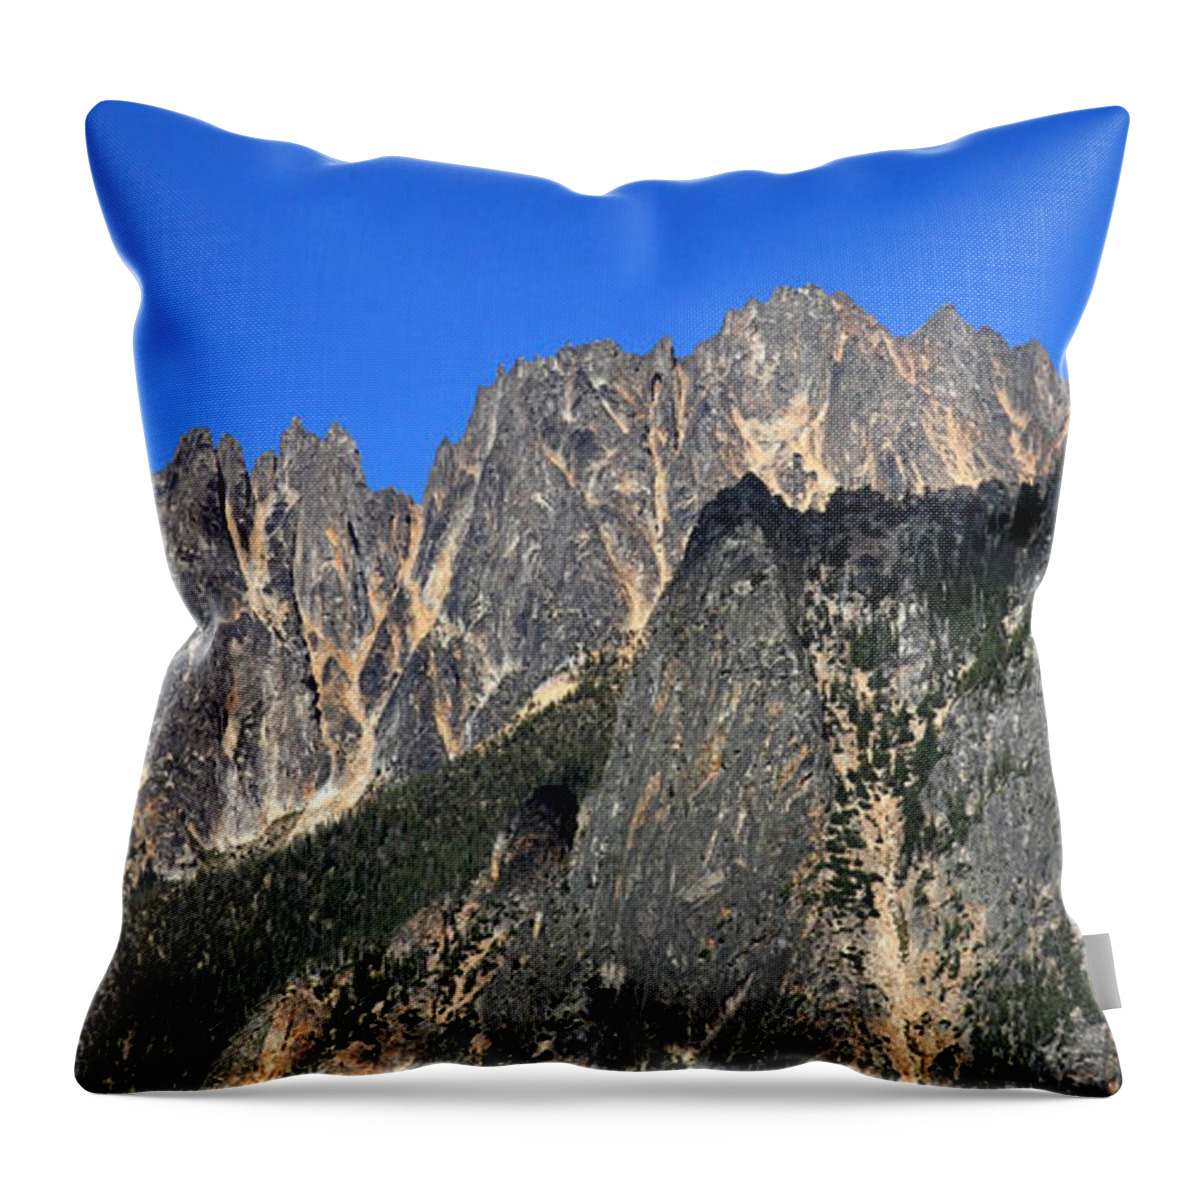 North Cascades National Park Throw Pillow featuring the photograph Snagtooth Ridge North Cascades National Park by Pierre Leclerc Photography